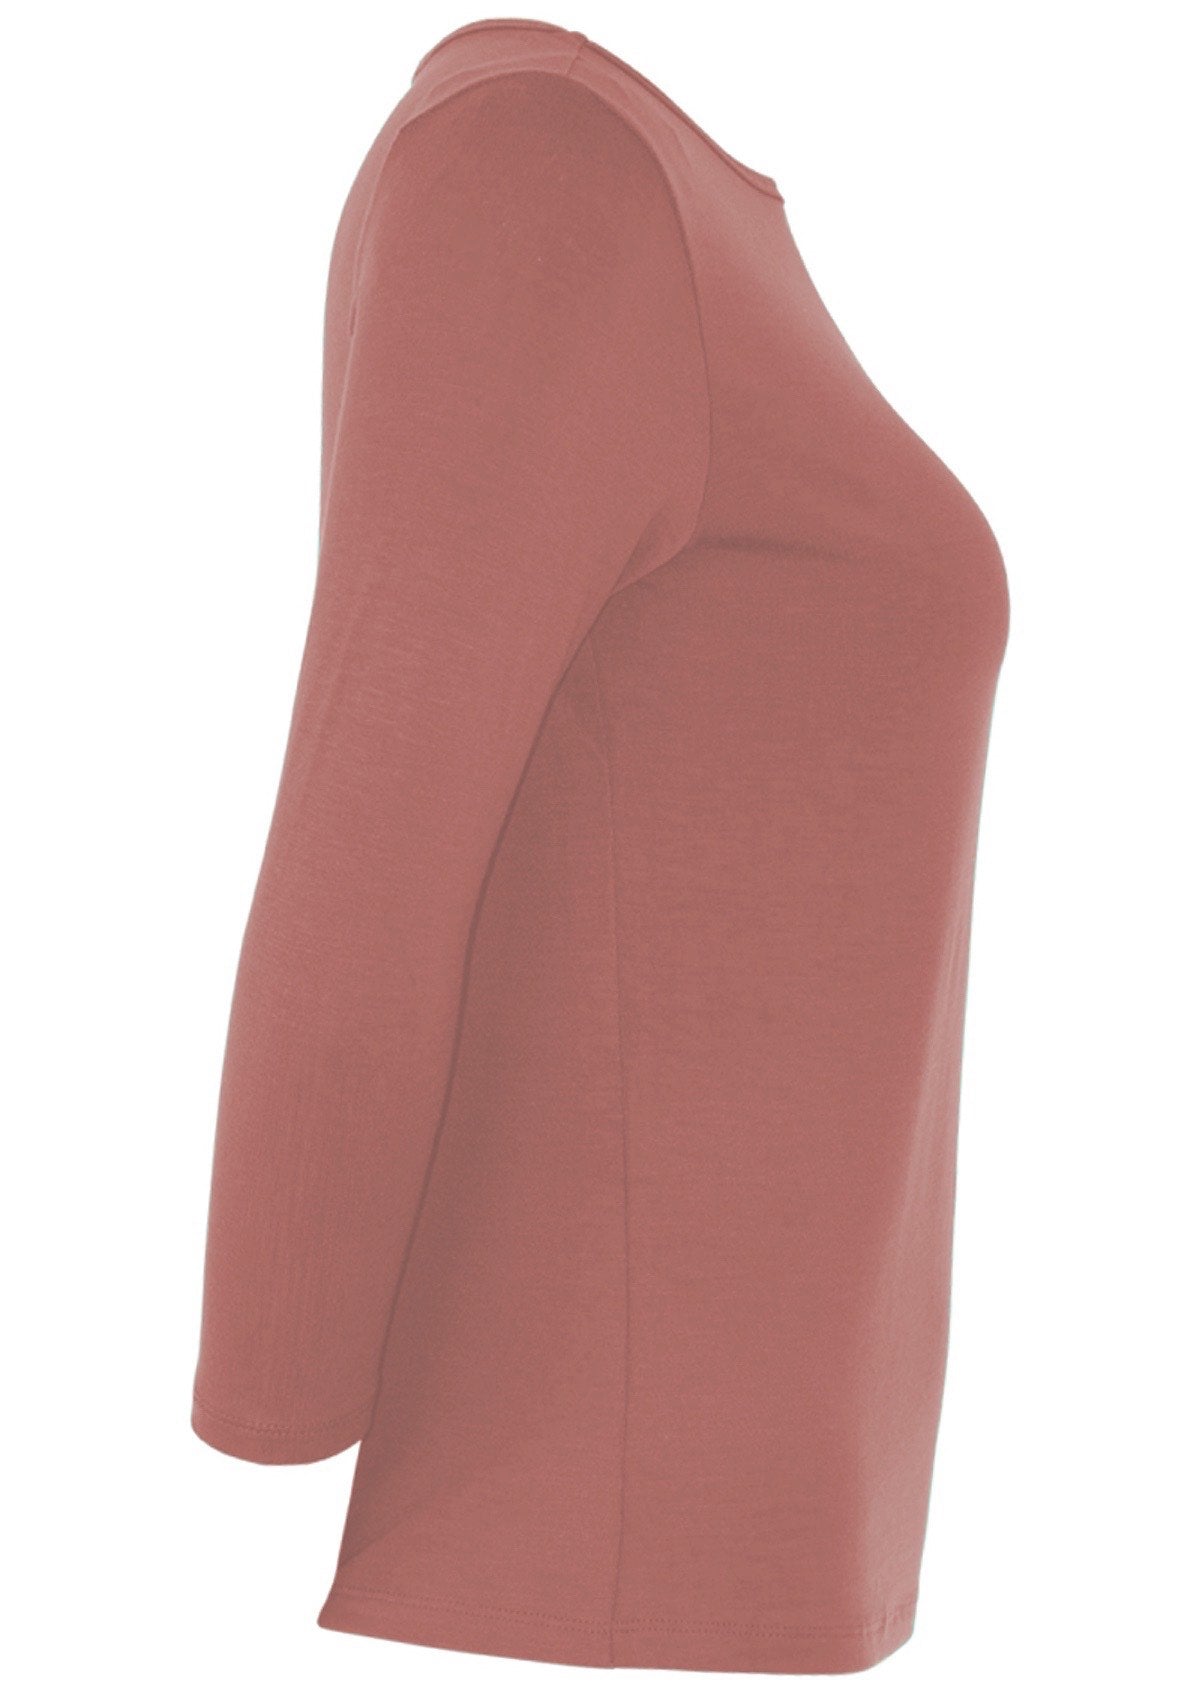 Side view of a women's rayon boat neck dusty pink 3/4 sleeve top.